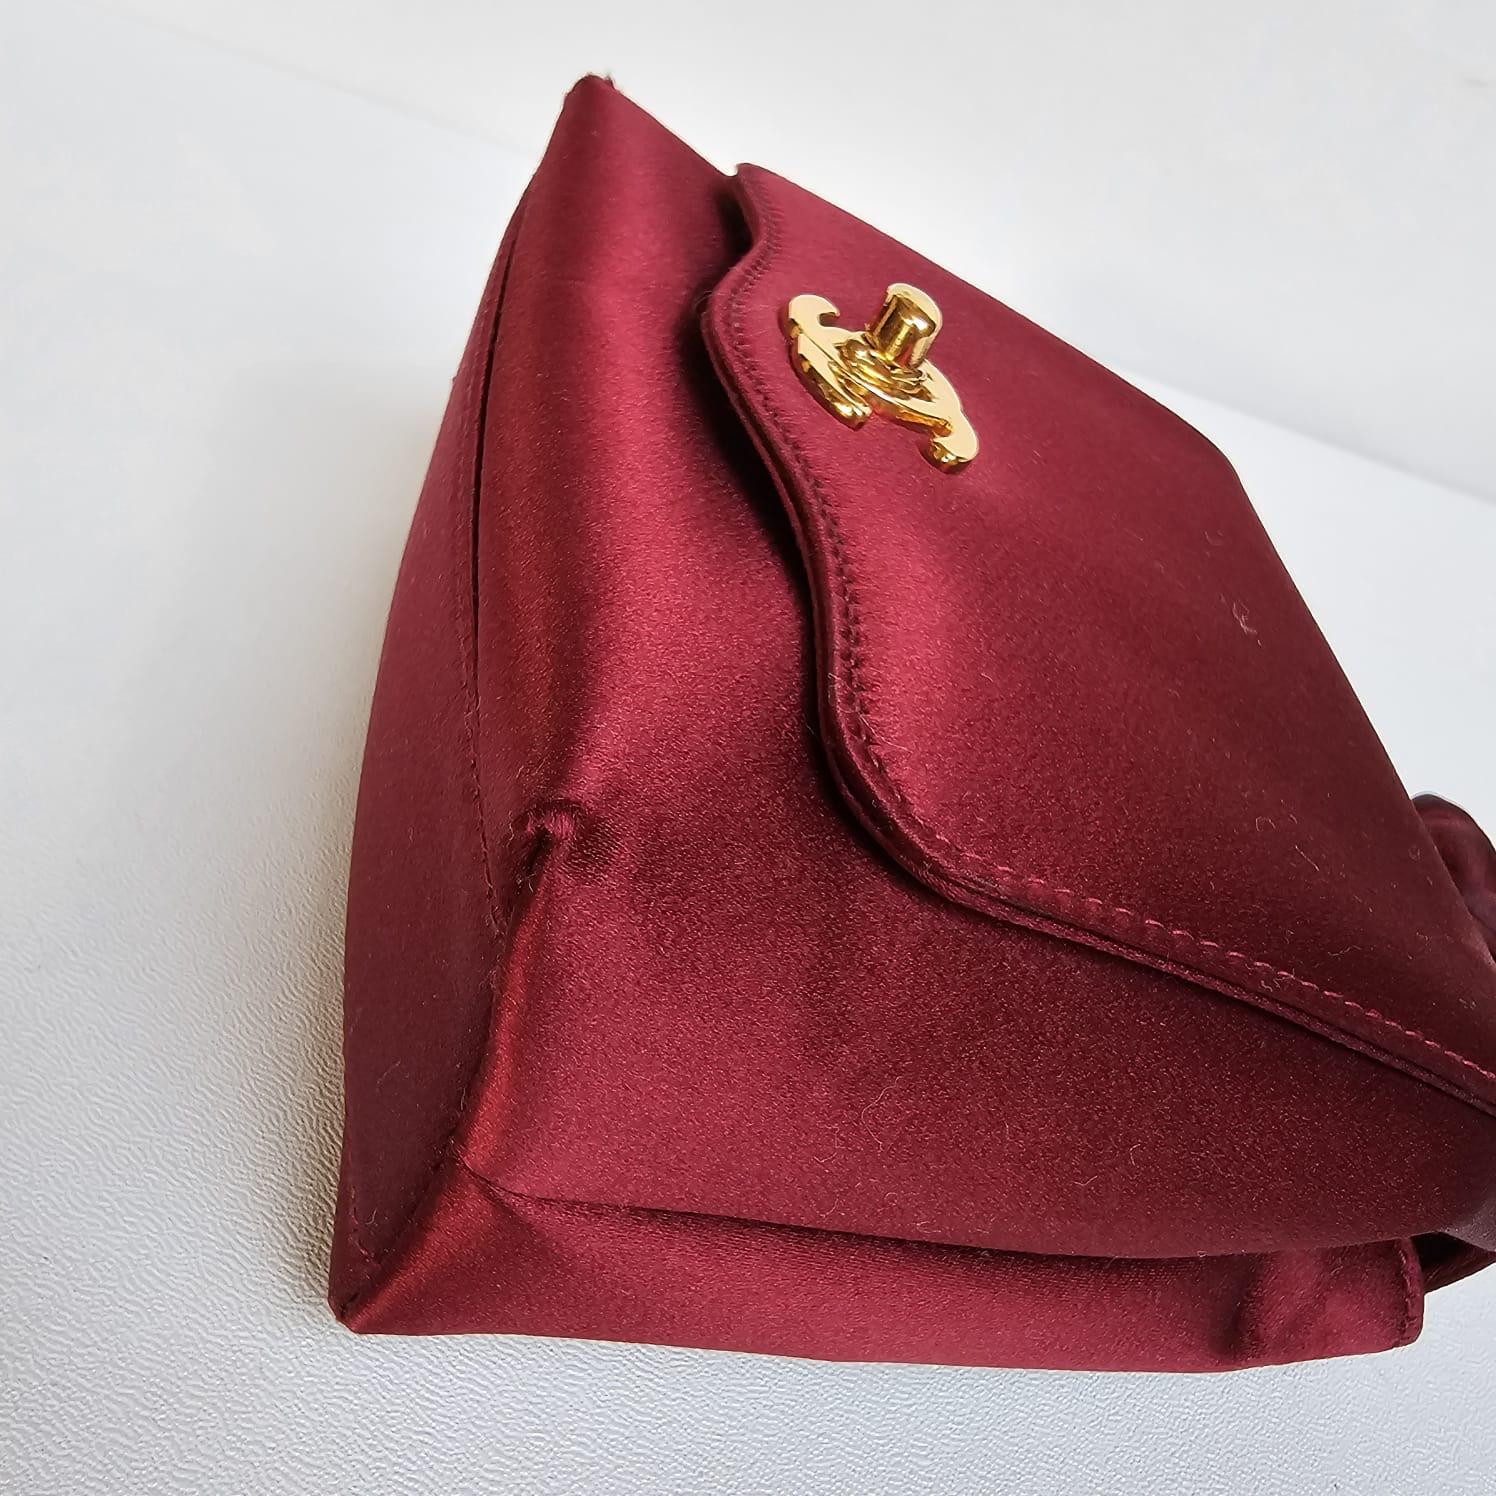 Very rare mini satin evening bag with wristlet in maroon with gold hardware. Beautiful and unique design in luxurious dark maroon color. Faint rubbings on the corners as shown on pictures but not to the point where its severe. Series #3. Comes with